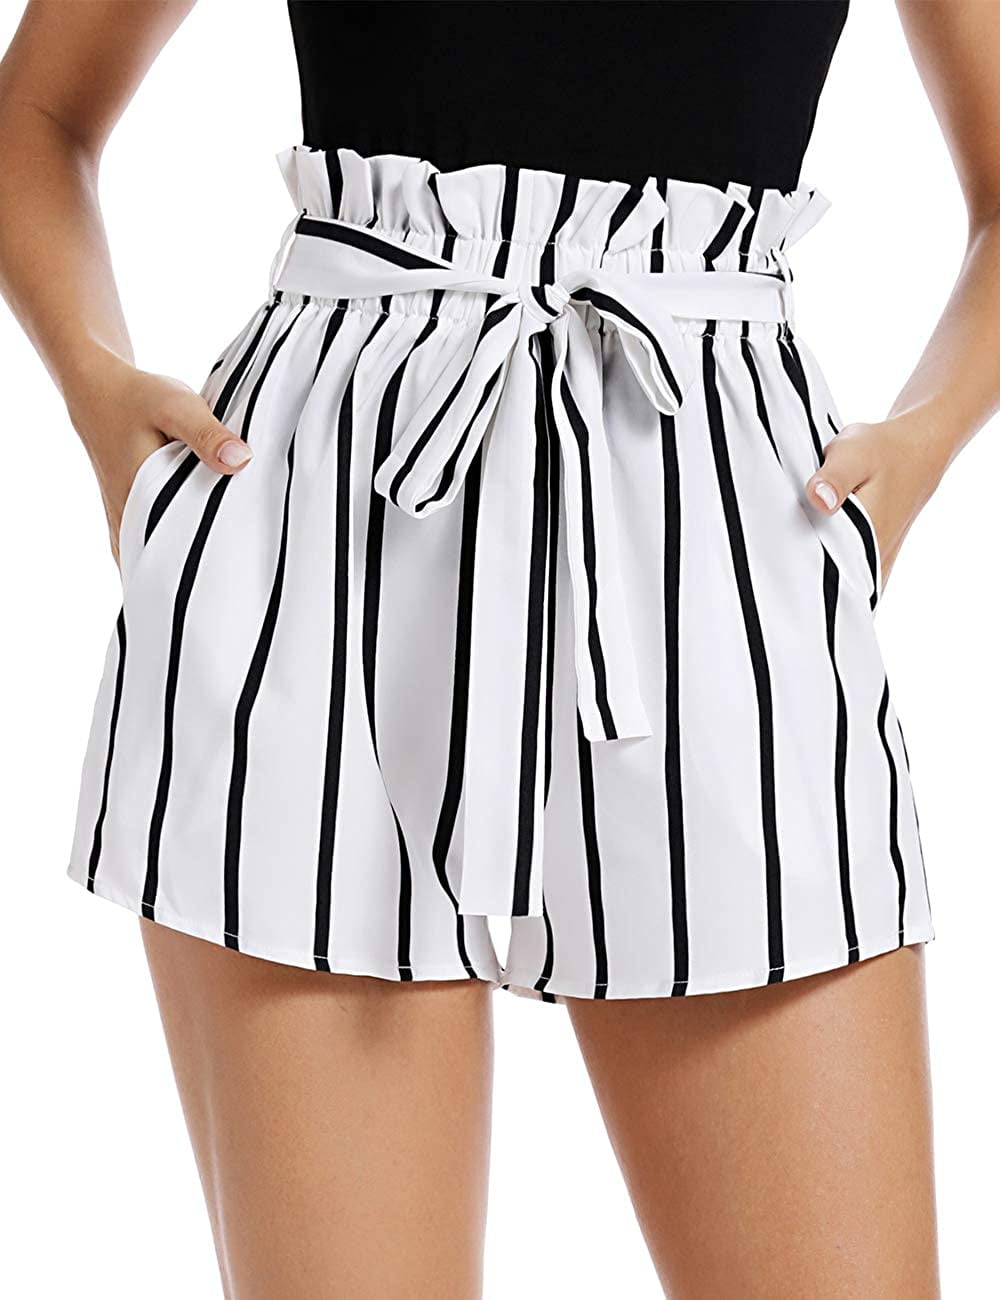 MISS MOLY Womens Casual Elastic Waist Striped Summer Beach Shorts with Pockets 